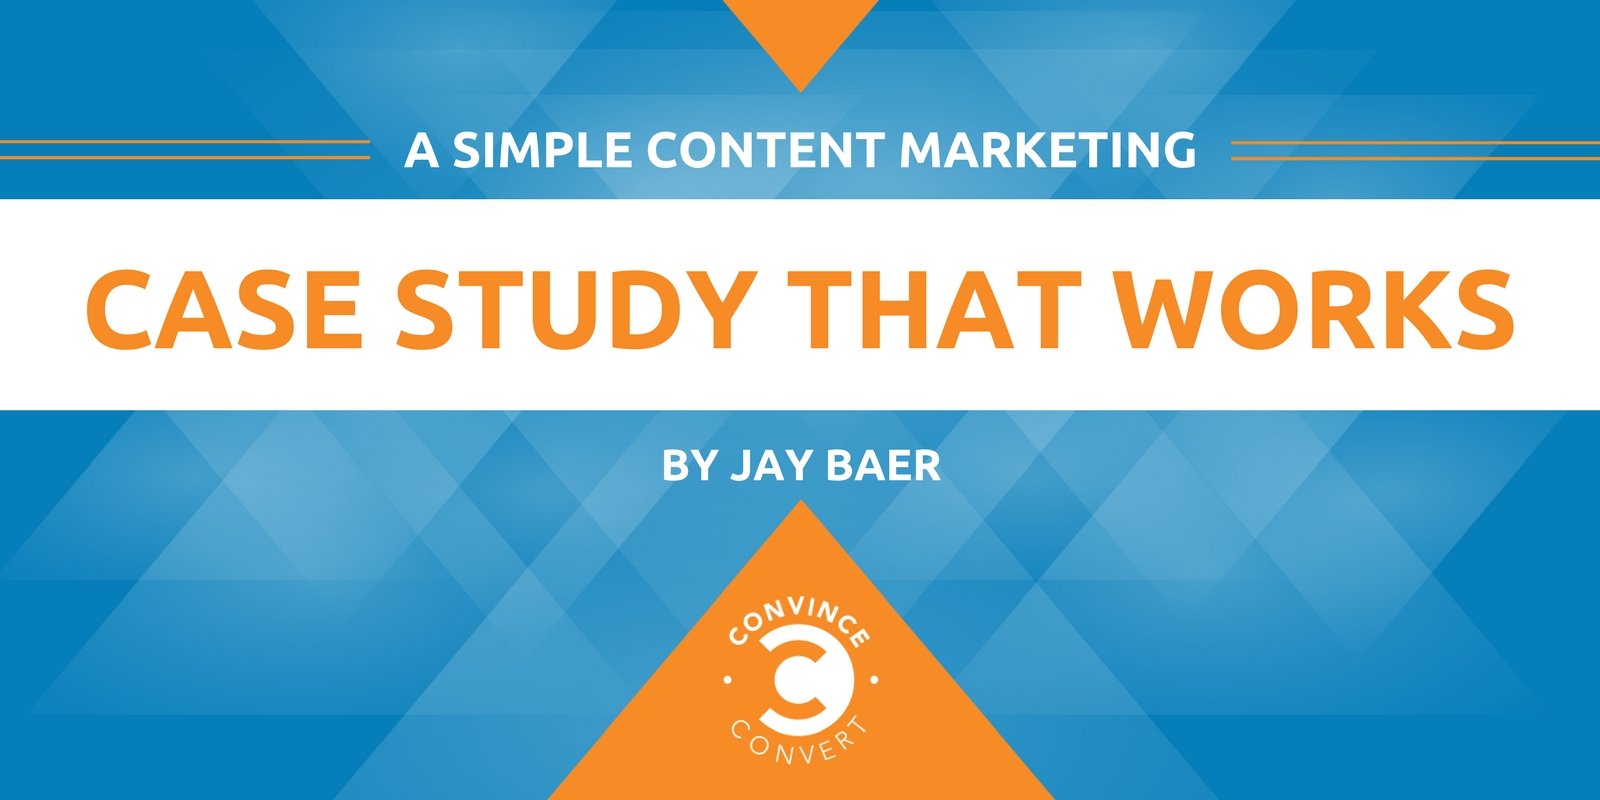 7 Key Steps to Content Marketing Online
